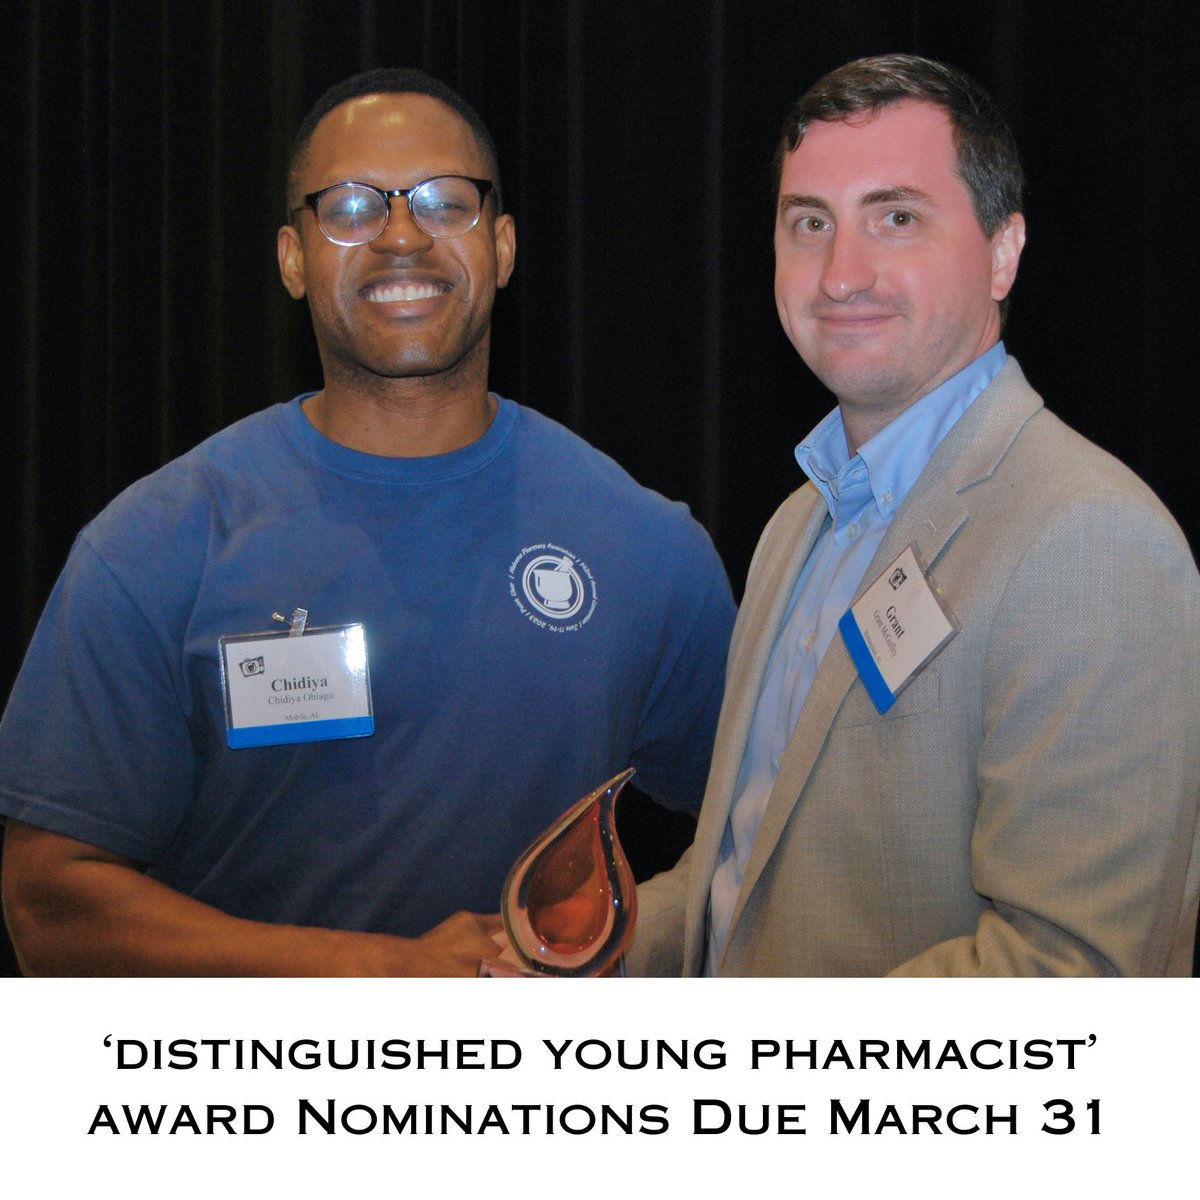 The ‘Distinguished Young Pharmacist’ award recognizes leadership and service to the profession by a pharmacist early in their career. Have someone in mind? Let us know by March 31! aparx.org/page/Award_Nom…